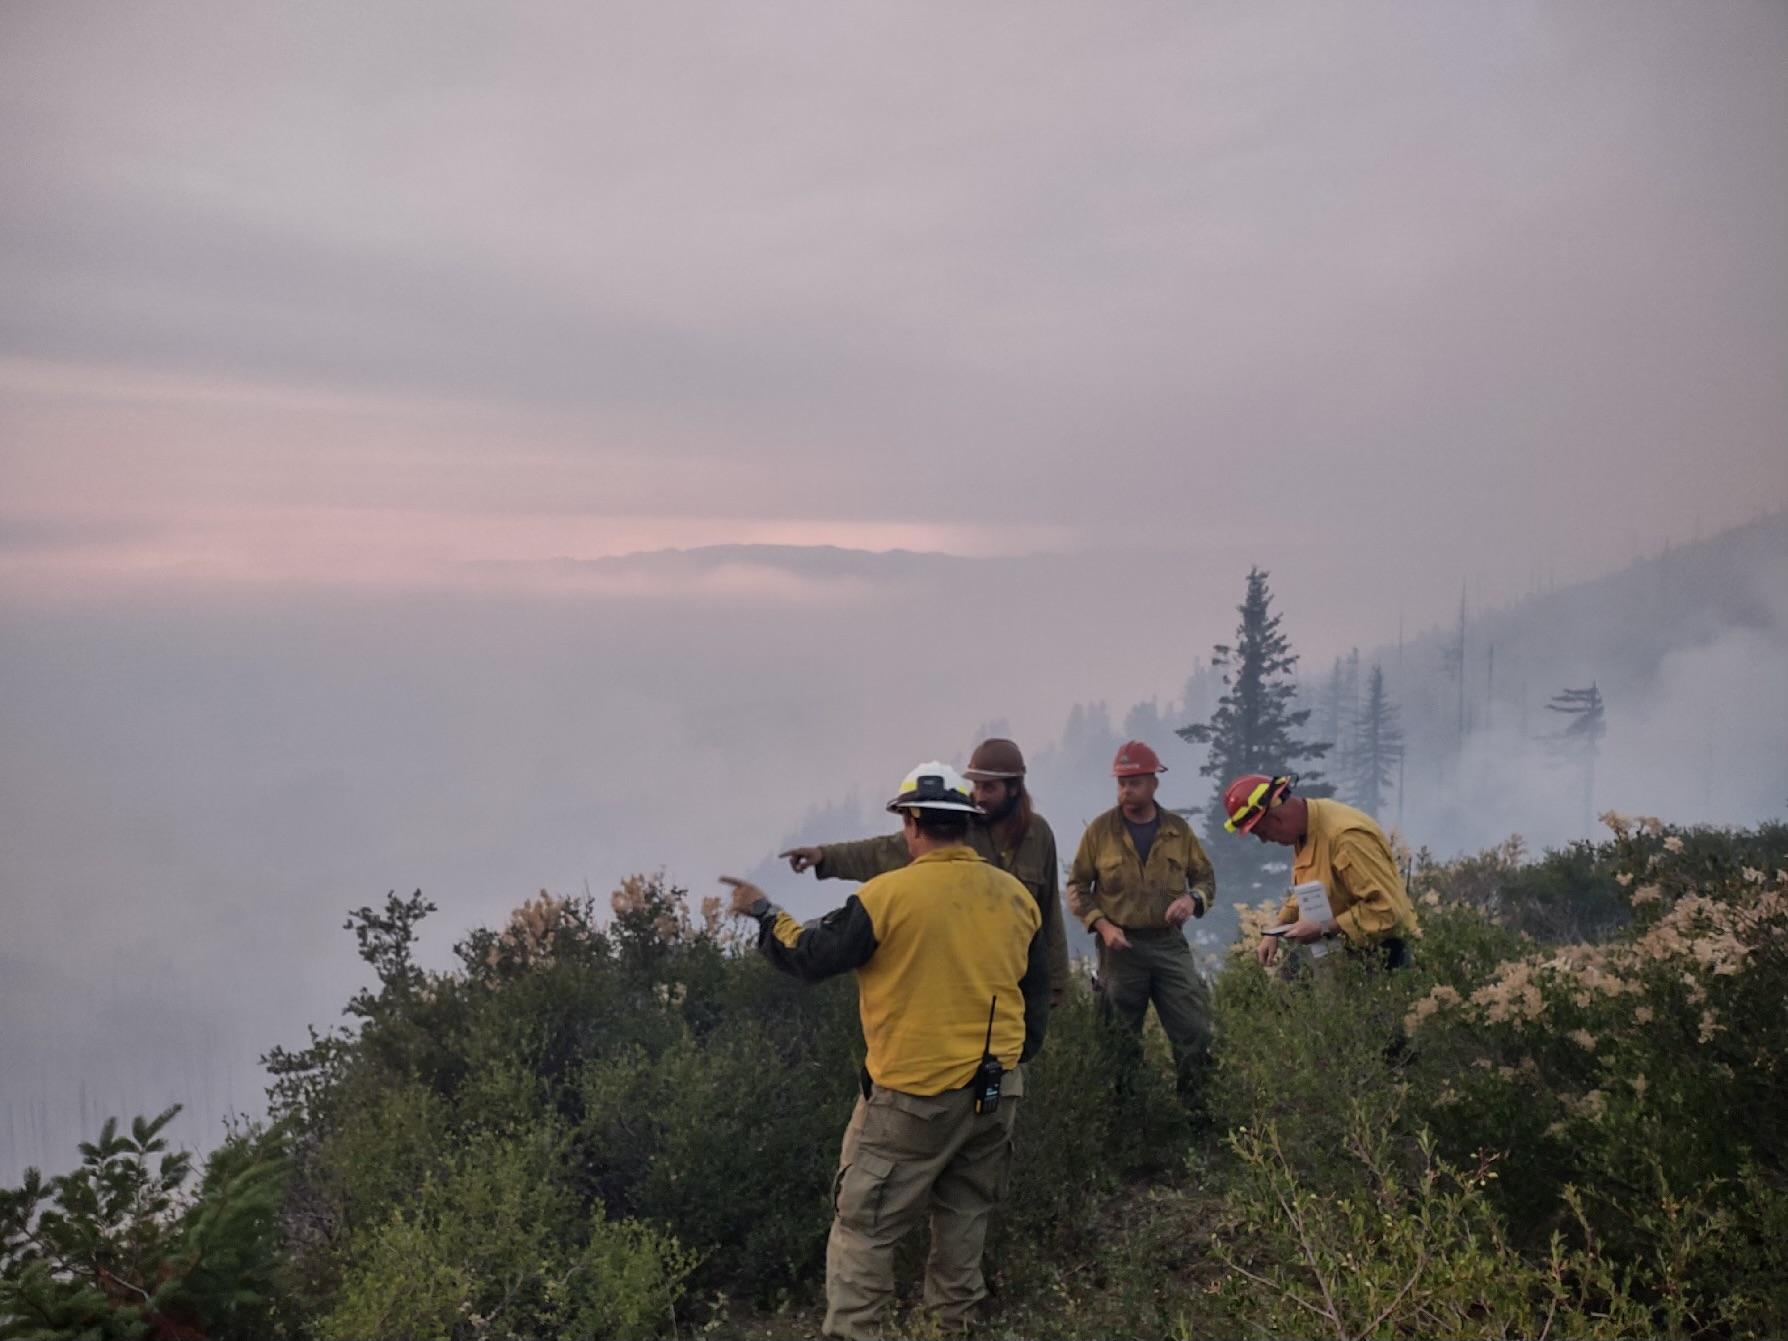 Firefighters evaluate, document and discuss fire weather conditions on the Flat Fire during day shift on July 22, 2023